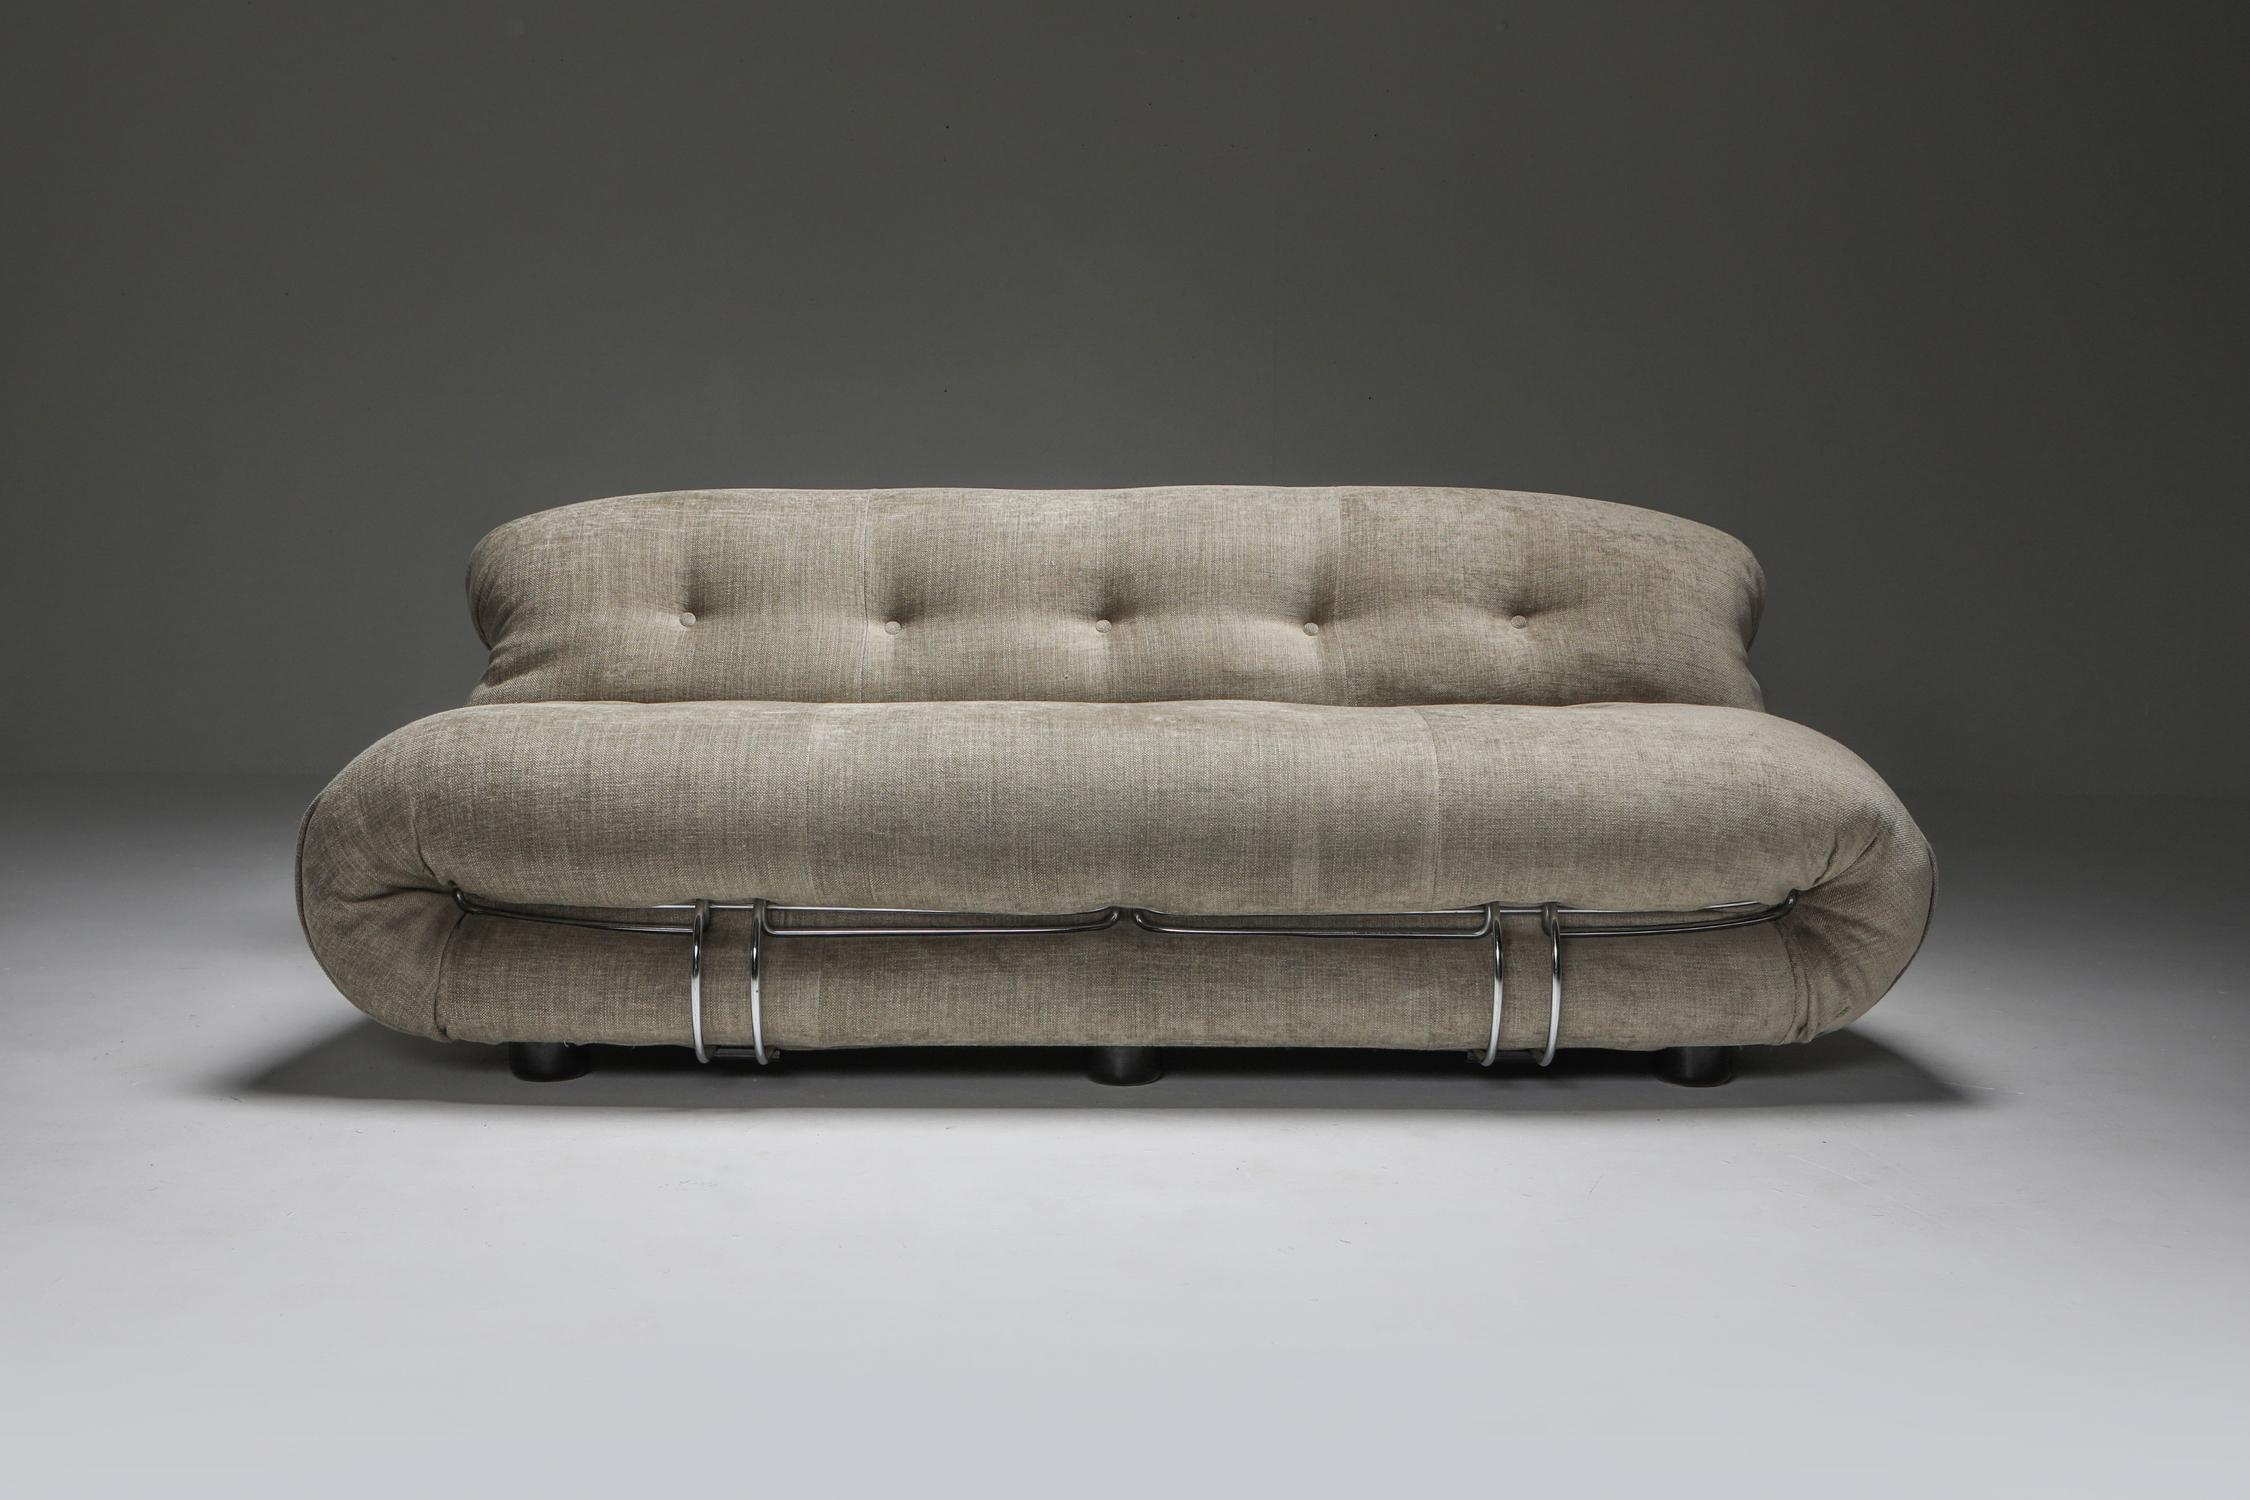 Afra & Tobia Scarpa, Soriana sofa, Cassina 1970s, new design Classic

Cassina 1970s, the Soriana collection was meant to express beauty and comfort by using a whole bundle of fabric held by a chrome-plated steel clamp.
Reupholstered in chenille